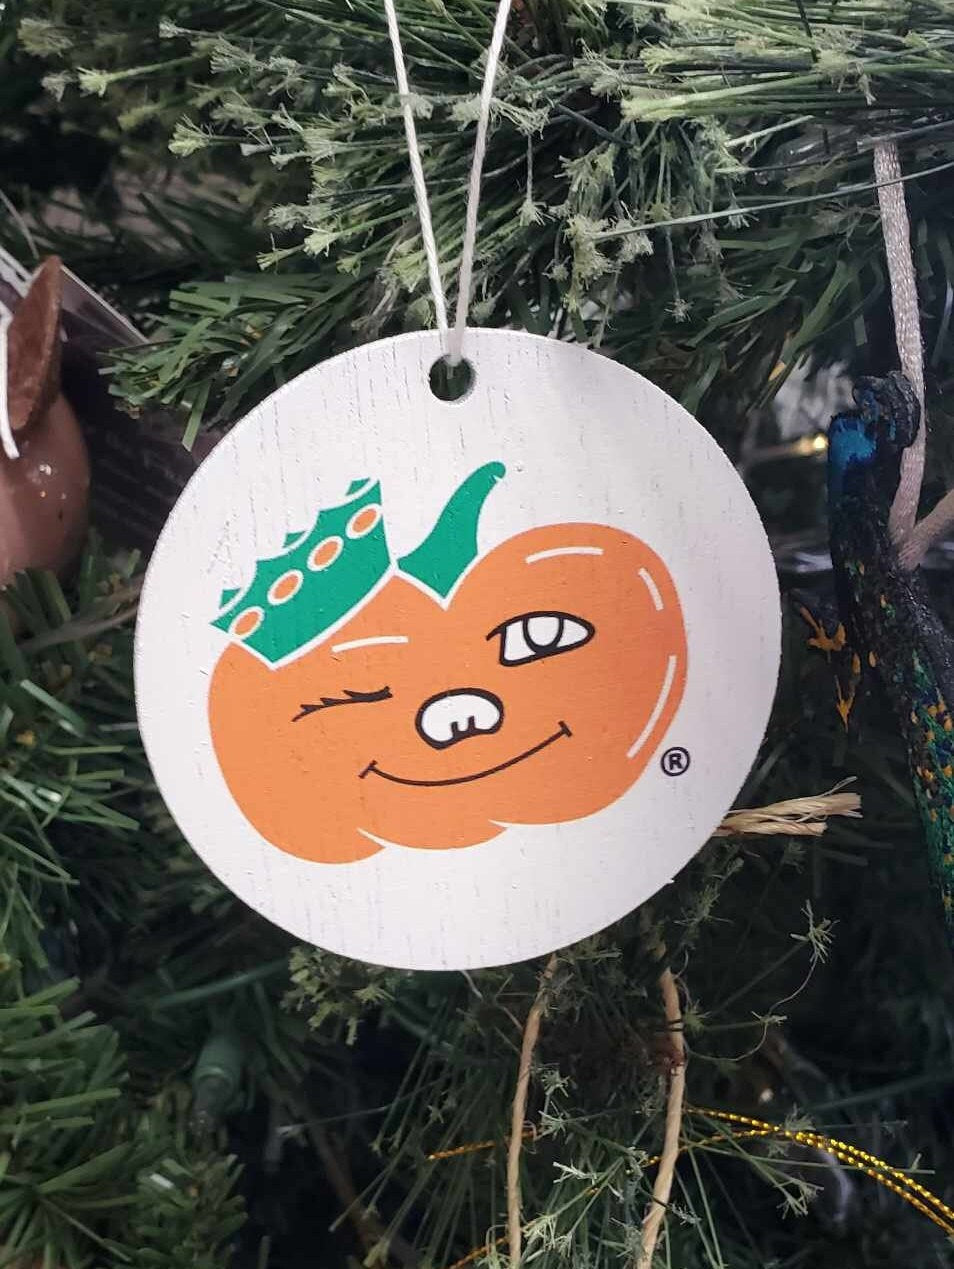 Winky Pumpkin Hometown Small Town Circleville Ohio Decor Gift Tree Decor Orange Ornament Decoration White Painted Uv Printed Image Holidays